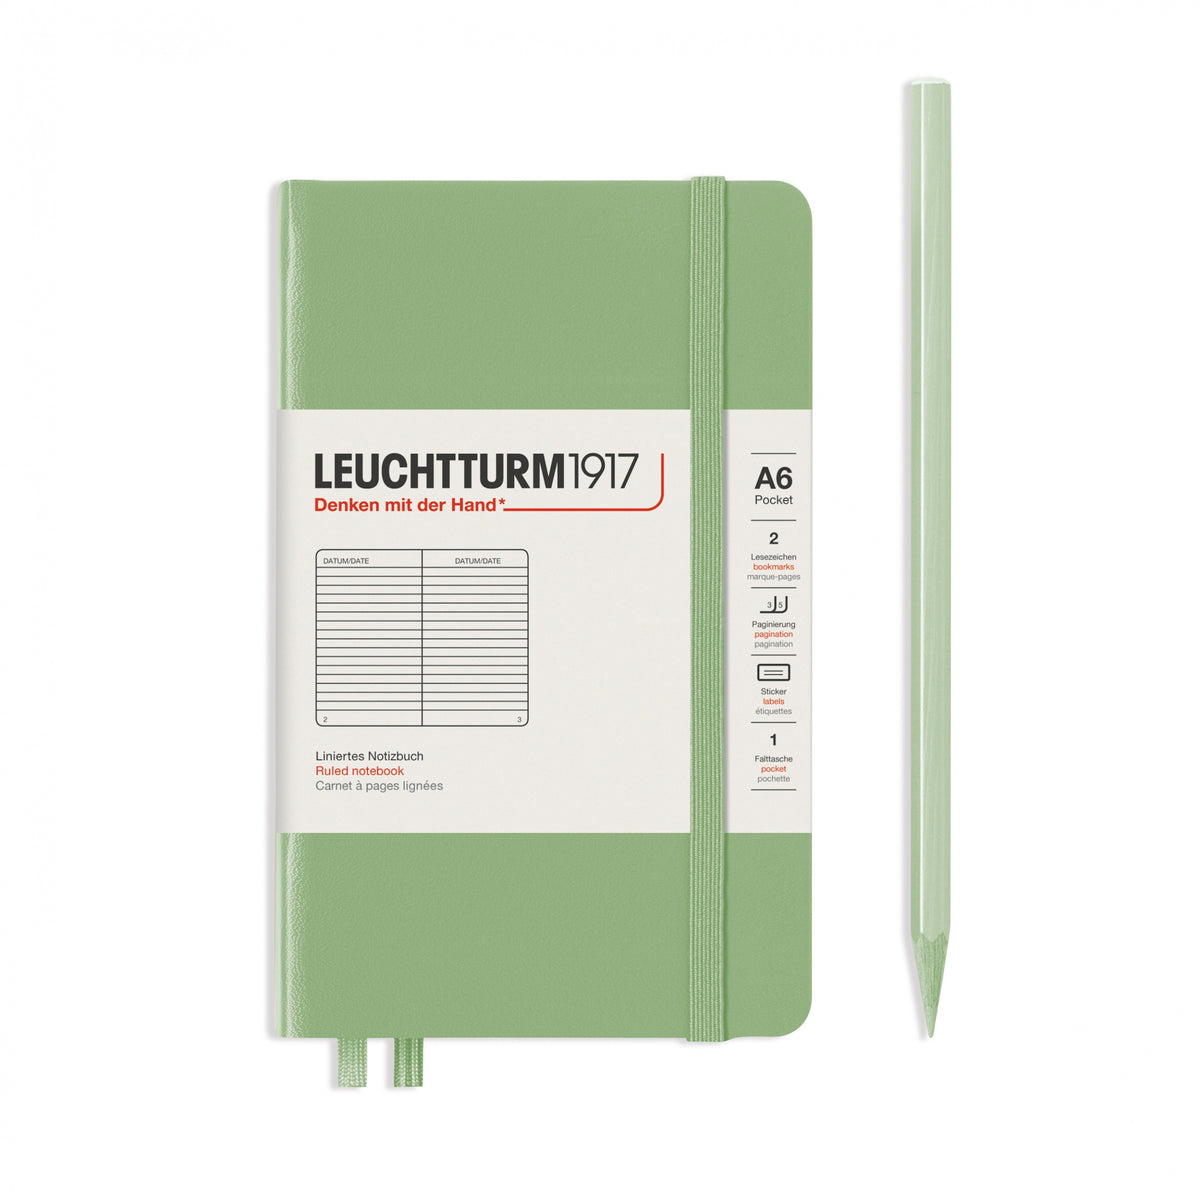 Leuchtturm1917 Notebook A6 Pocket Hardcover in sage green and lined ruling from penny black